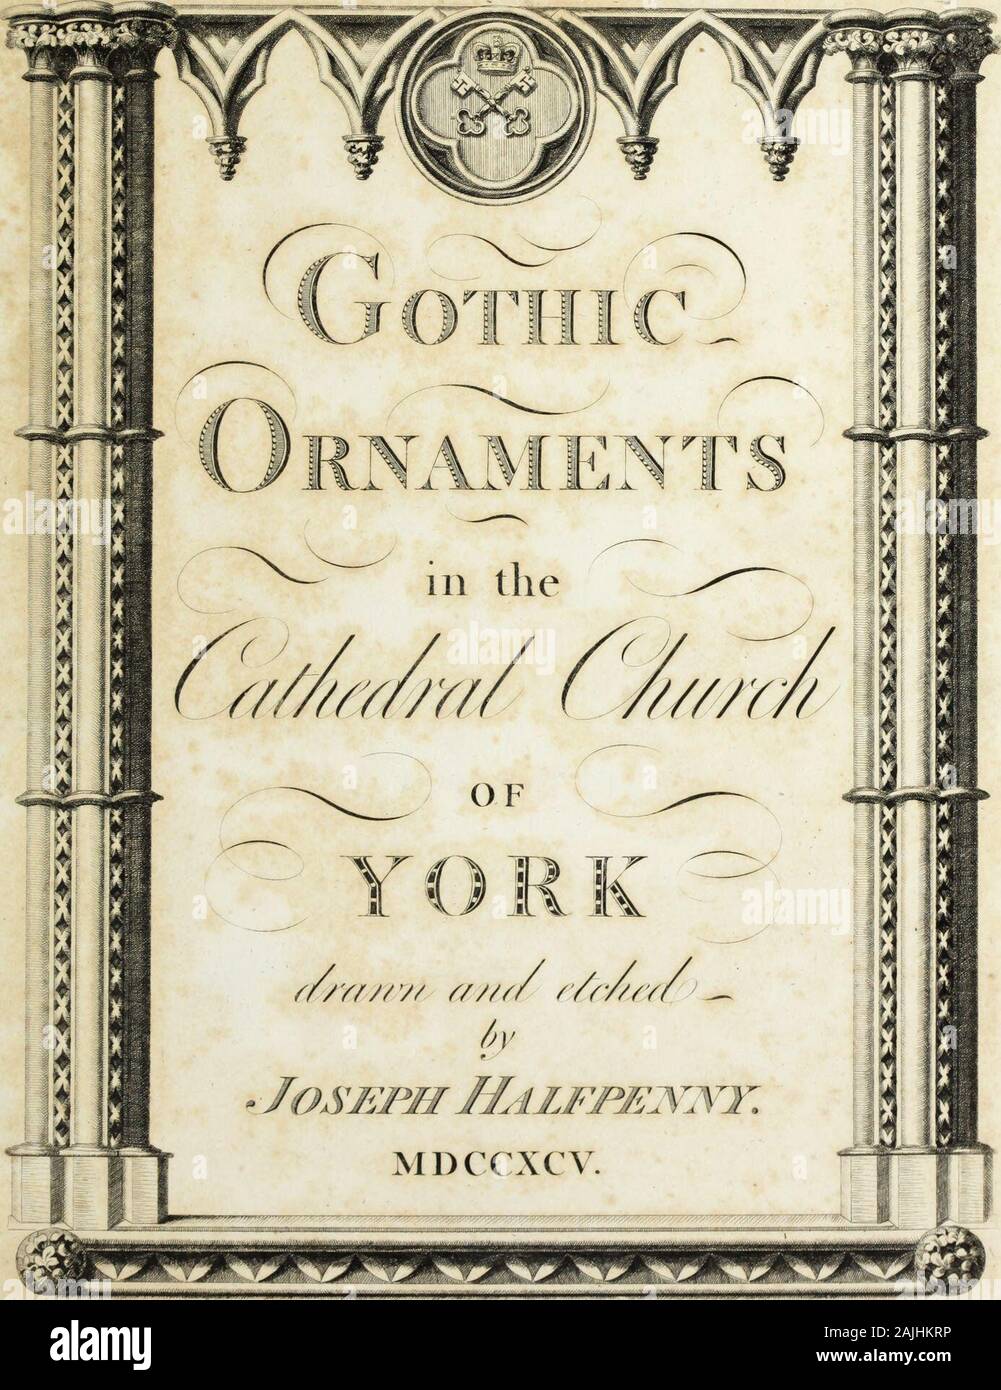 Gothic ornaments in the cathedral church of York . Published$y J.Todd & Sons. ) &lt;»/, . TO THE VERY REVEREND THE DEANTHE RESIDENTIARYAND THE PREBENDARIESOF THE CATHEDRAL CHURCH OF YORK THIS SELECTION OF GOTHIC ORNAMENTS IS HUMBLY DEDICATEDBY THEIR MOST OBEDIENT SERVANT JOSEPH HALFPENNY. SUBSCRIBERS. His MAJESTYS LIBRARY, by Command.His Royal Highnefs PRINCE WILLIAM of GLOUCESTER, Acklom, jonathan Efq;Acklom, Richard, Efq;Agar, Benjamin, Efq;Allan, George, Efq;Allanfon, Mifs AnnaAnderfon, John, Efq;Antiquarian Society of LondonArnold, George, Efq;Atkinfon, Mr. Thomas, ArchitectAtkinfon, Mr. J Stock Photo